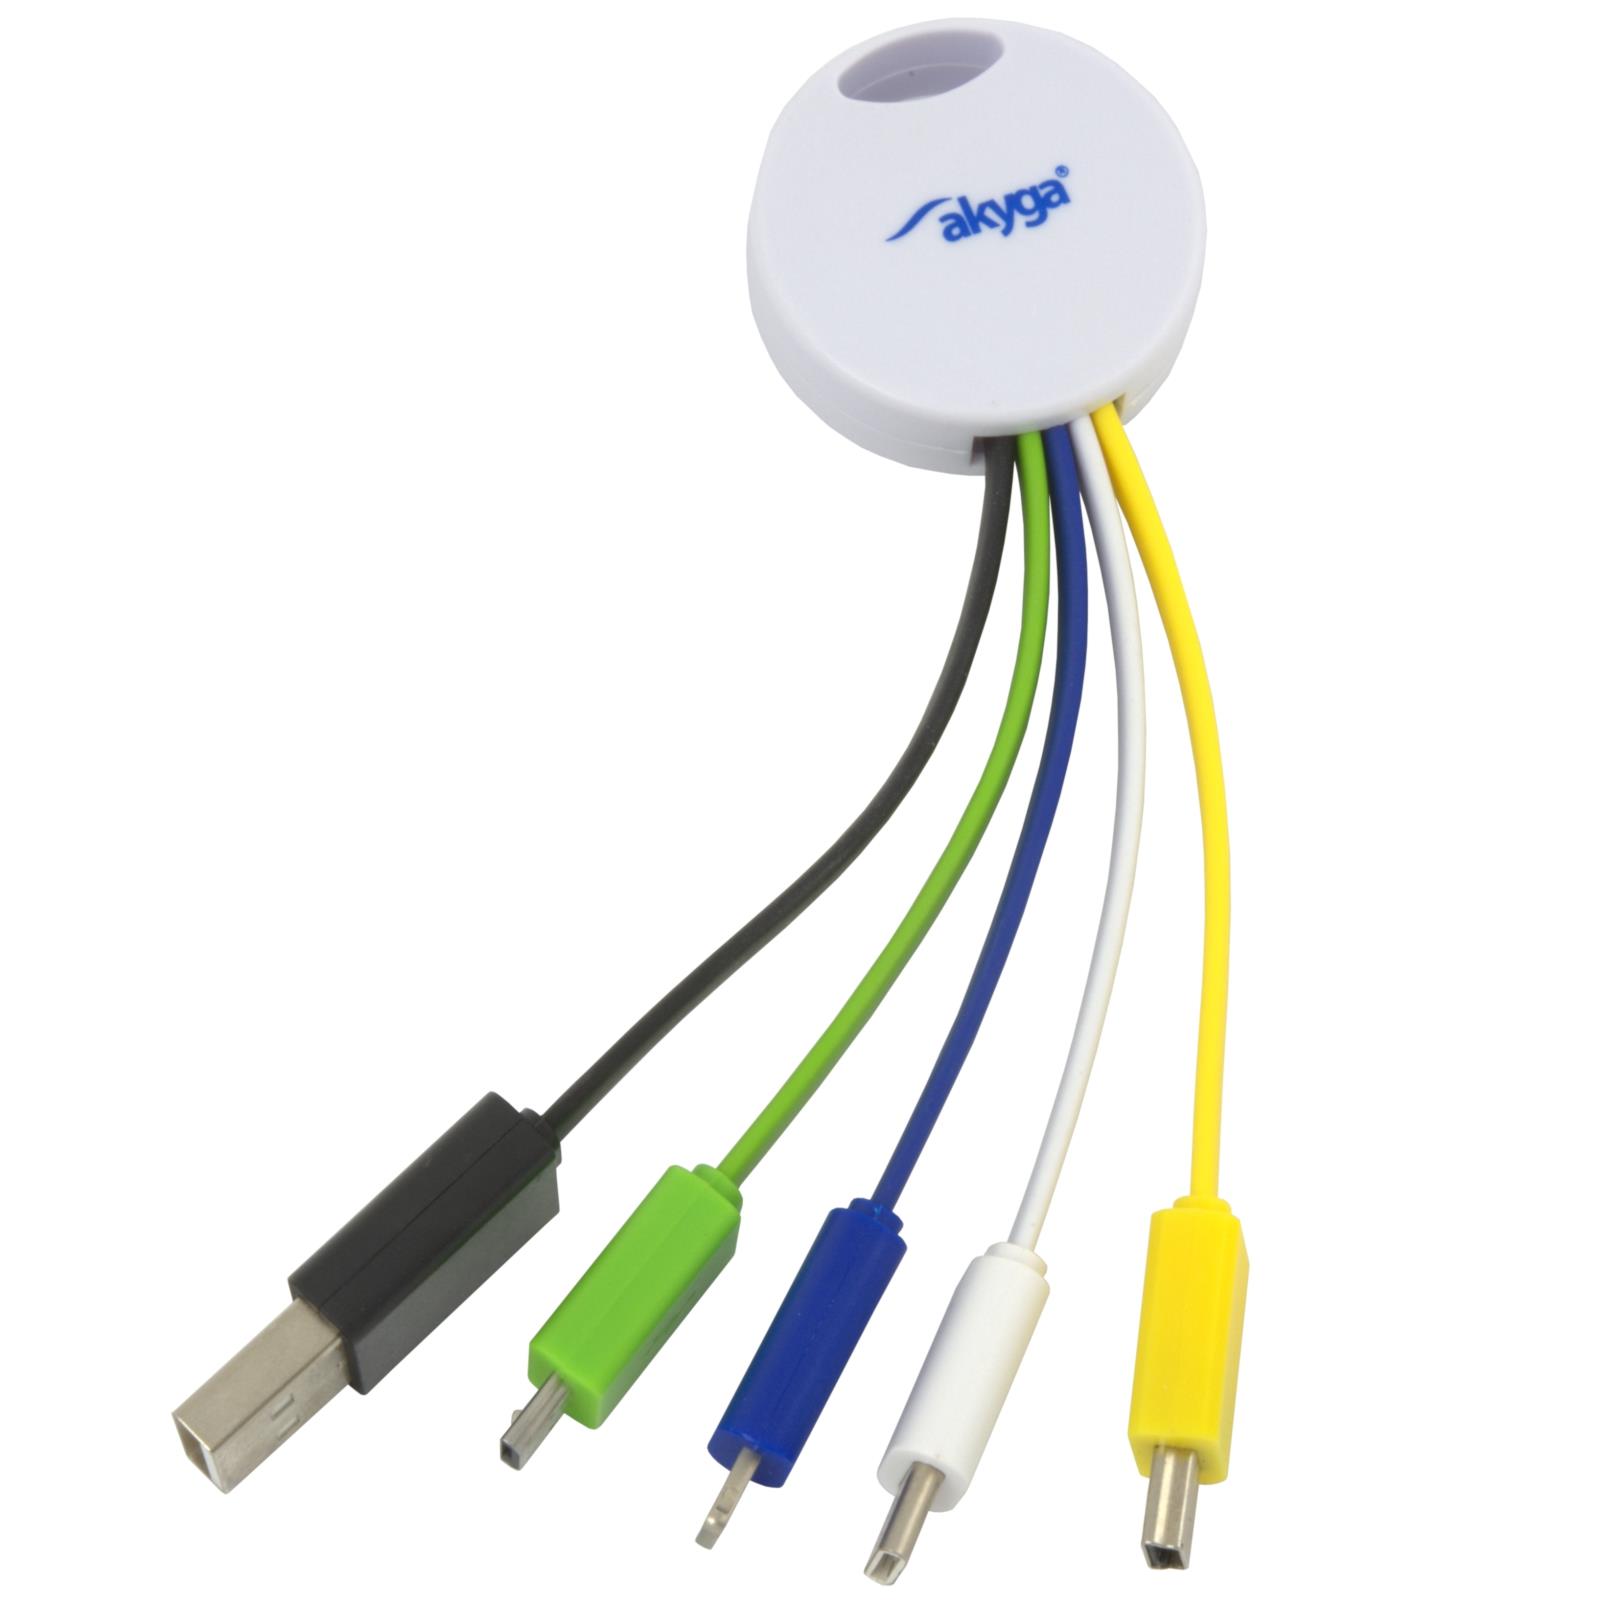 Akyga AK-AD-51 adapter pendant power cable USB 5 in 1